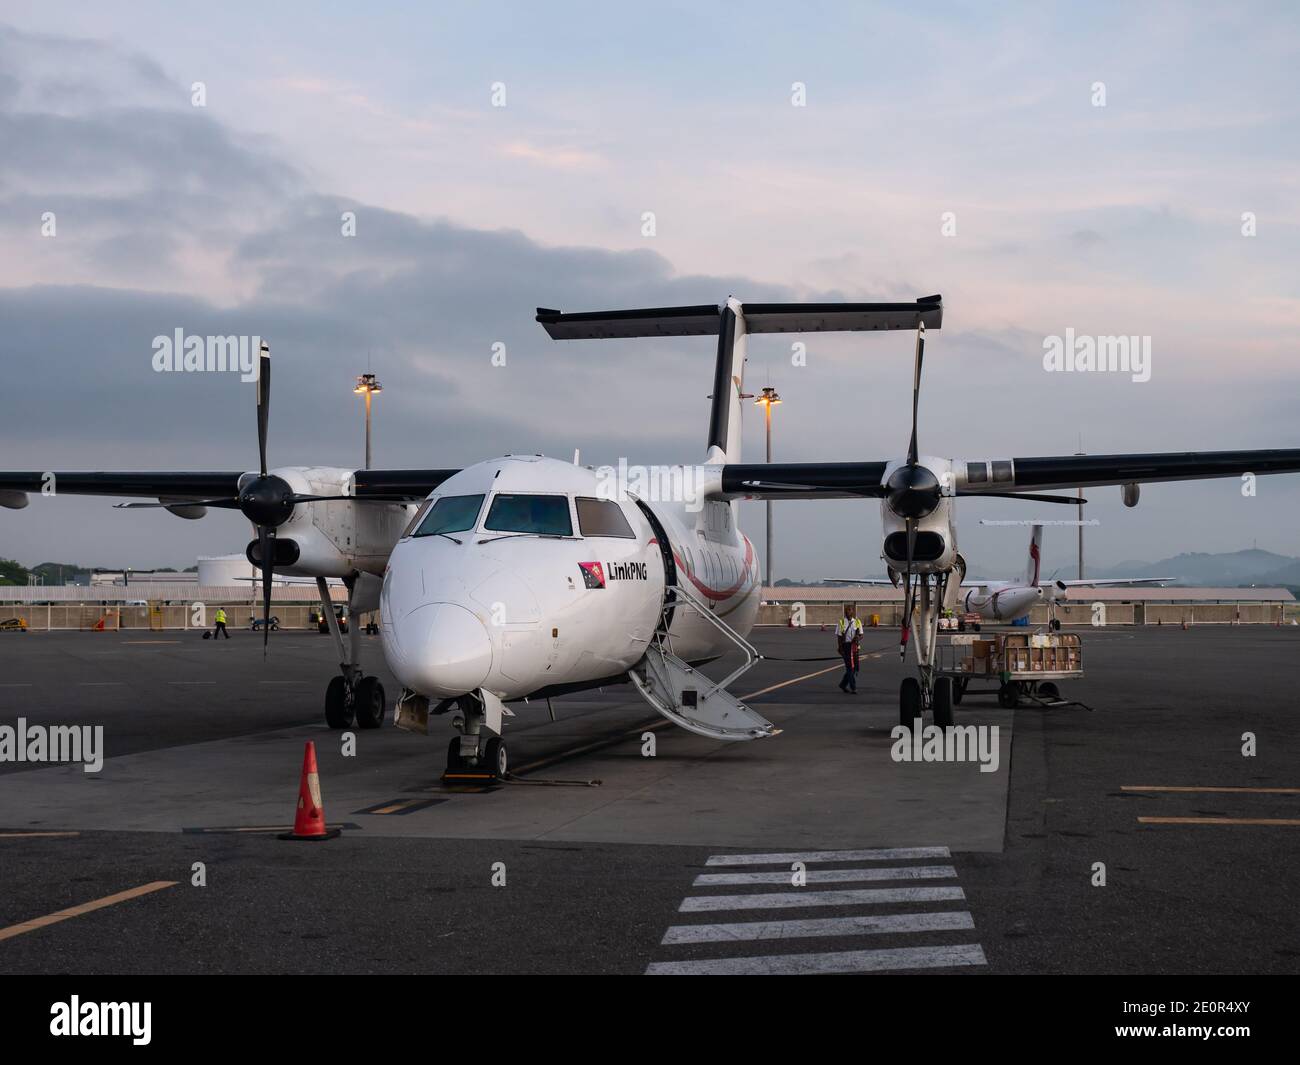 Bombardier Q400 from Air Niugini early morning at Jacksons International Airport in Port Moresby, the capital of Papua New Guinea. Stock Photo